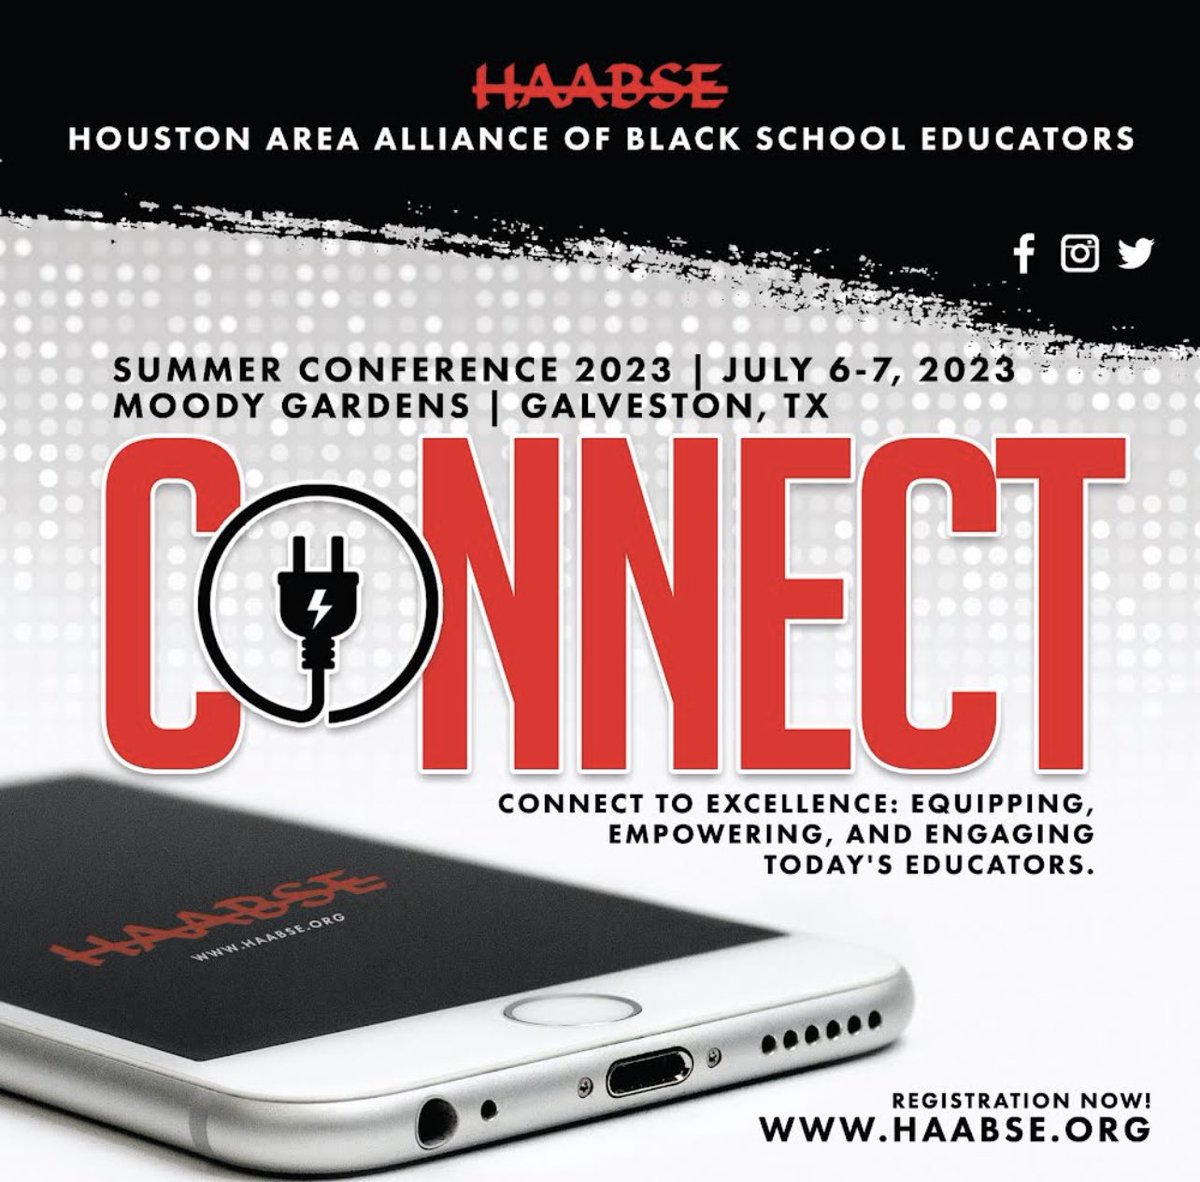 We are excited to announce that we will be attending & presenting at this years @HAABSE3 Connect Summer Conference. Register today at 
🚨 haabse.regfox.com/summer-confere… #HAABSEconnect @LINC_PD @CCThaddies @jasontoddgreen